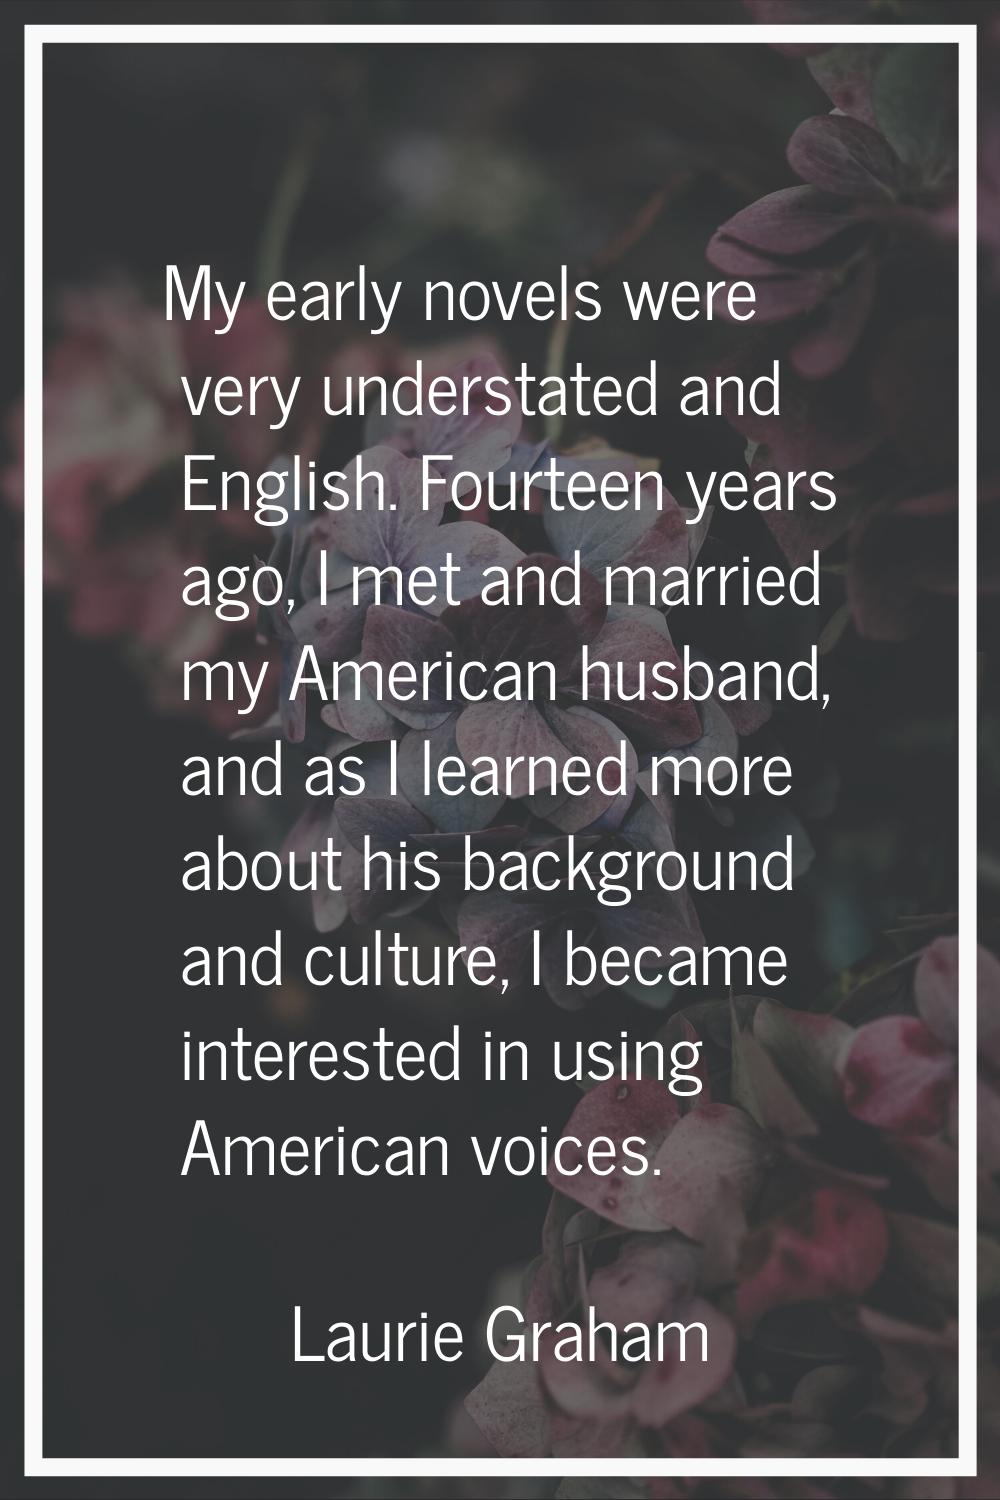 My early novels were very understated and English. Fourteen years ago, I met and married my America